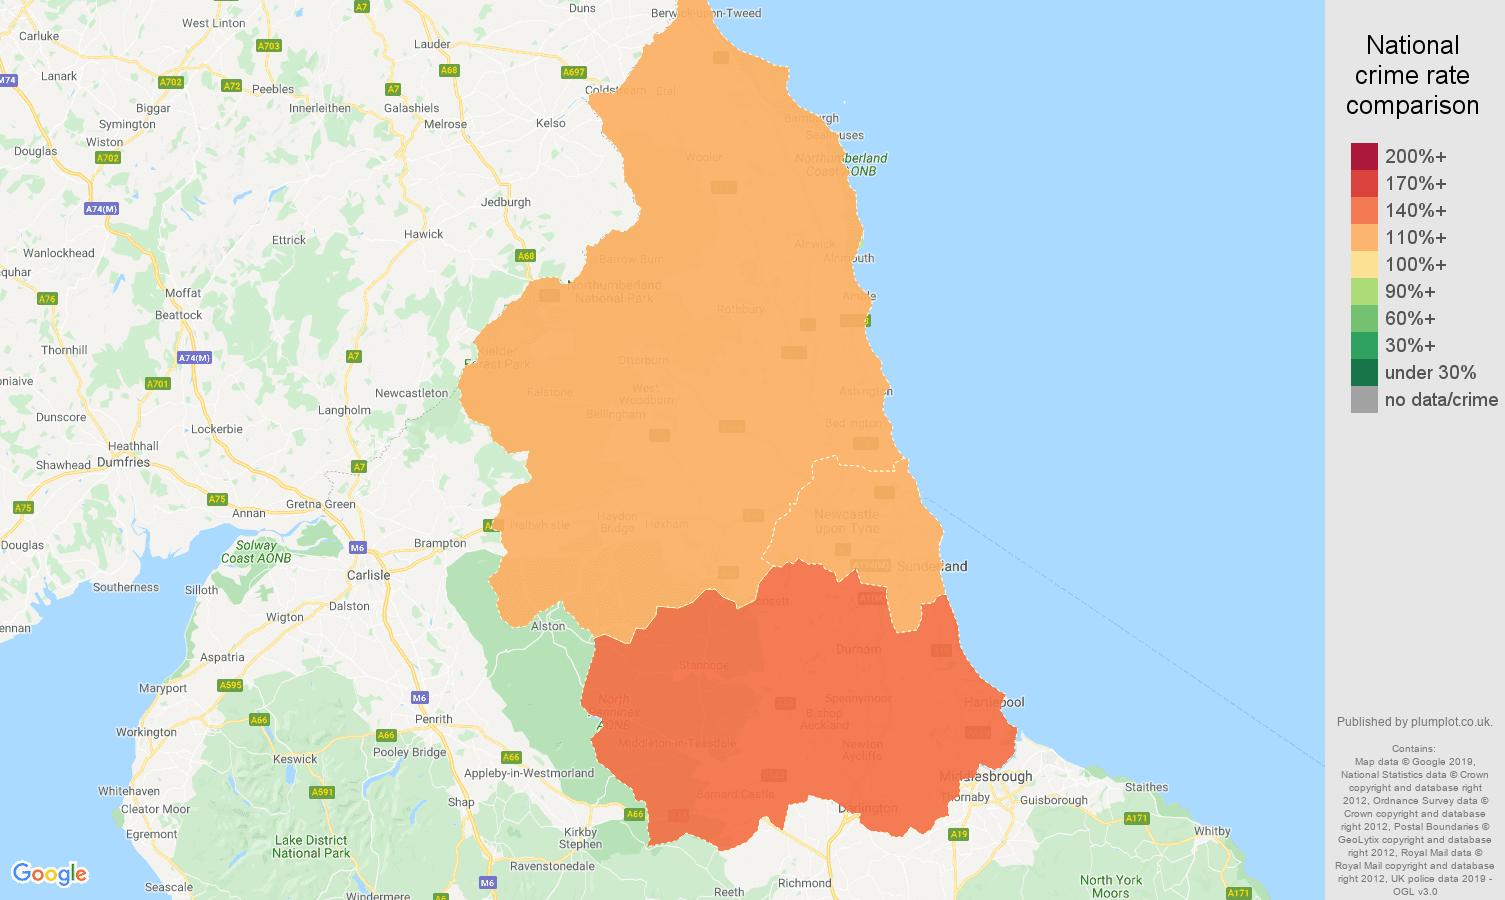 North East other crime rate comparison map